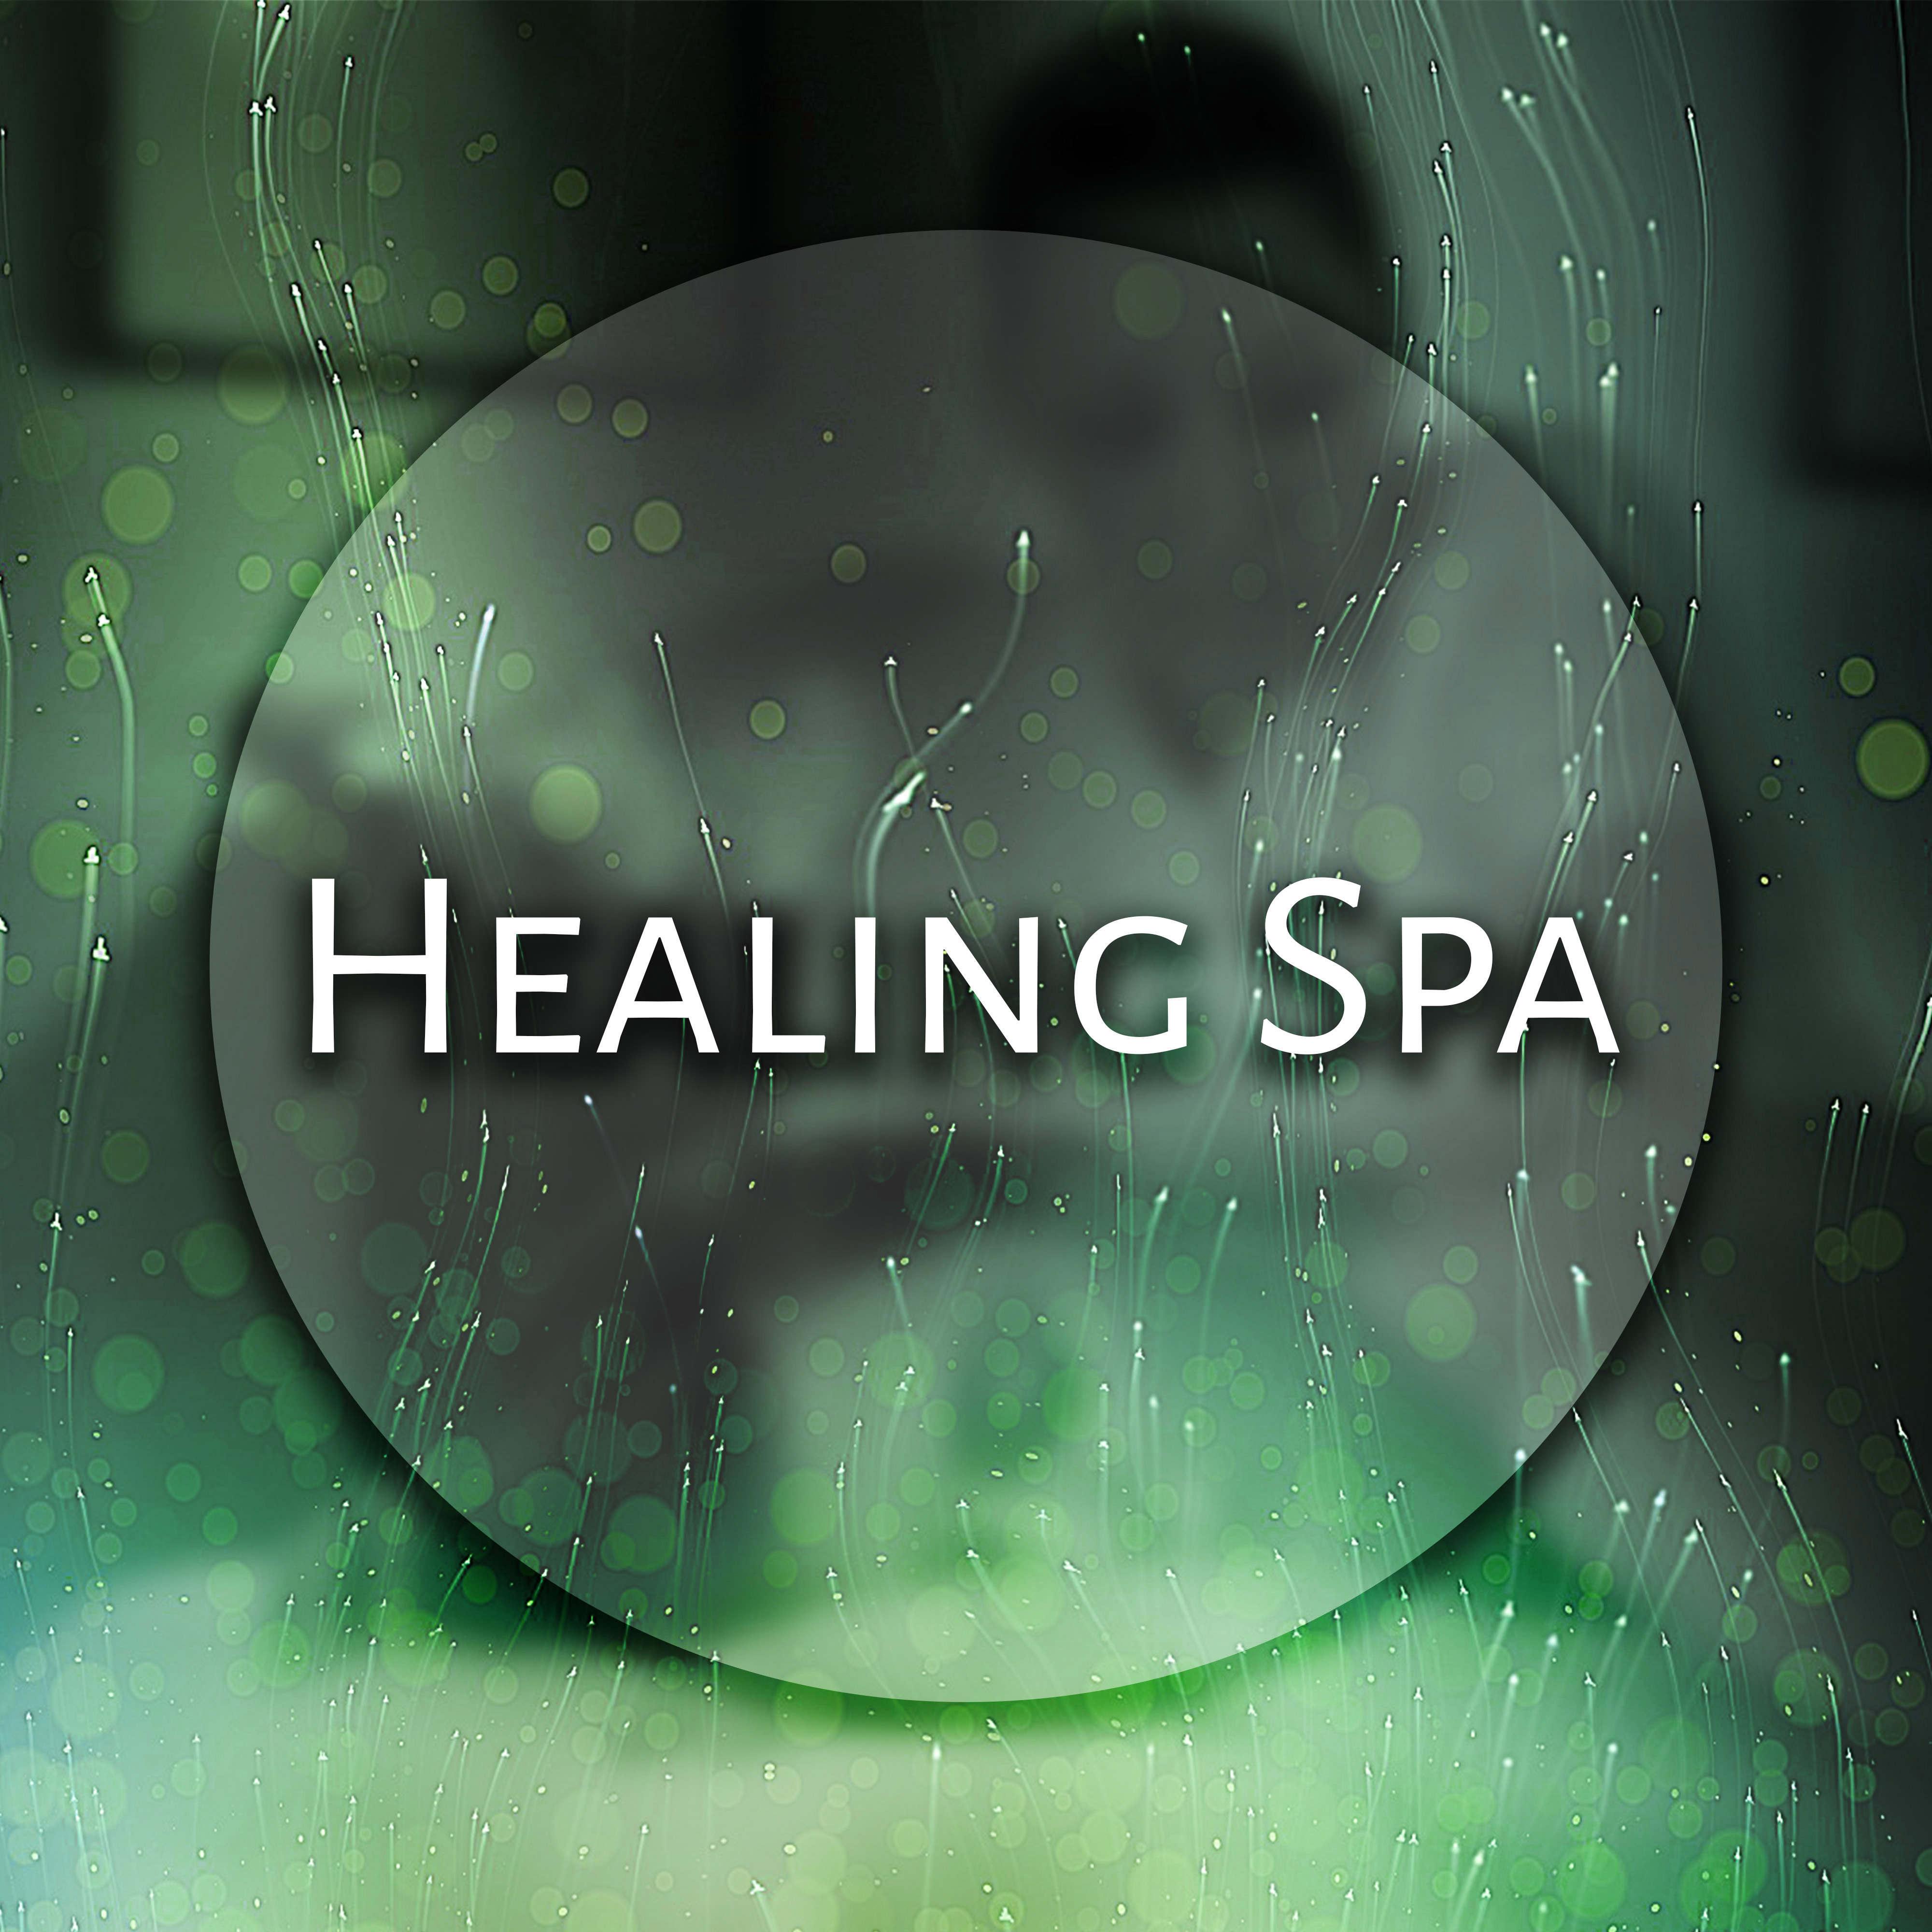 Healing Spa  Serenity Nature Sounds for Massage, Wellness, Relief, Sea Waves, Ocean Dreams, Pure Mind, Spa Music